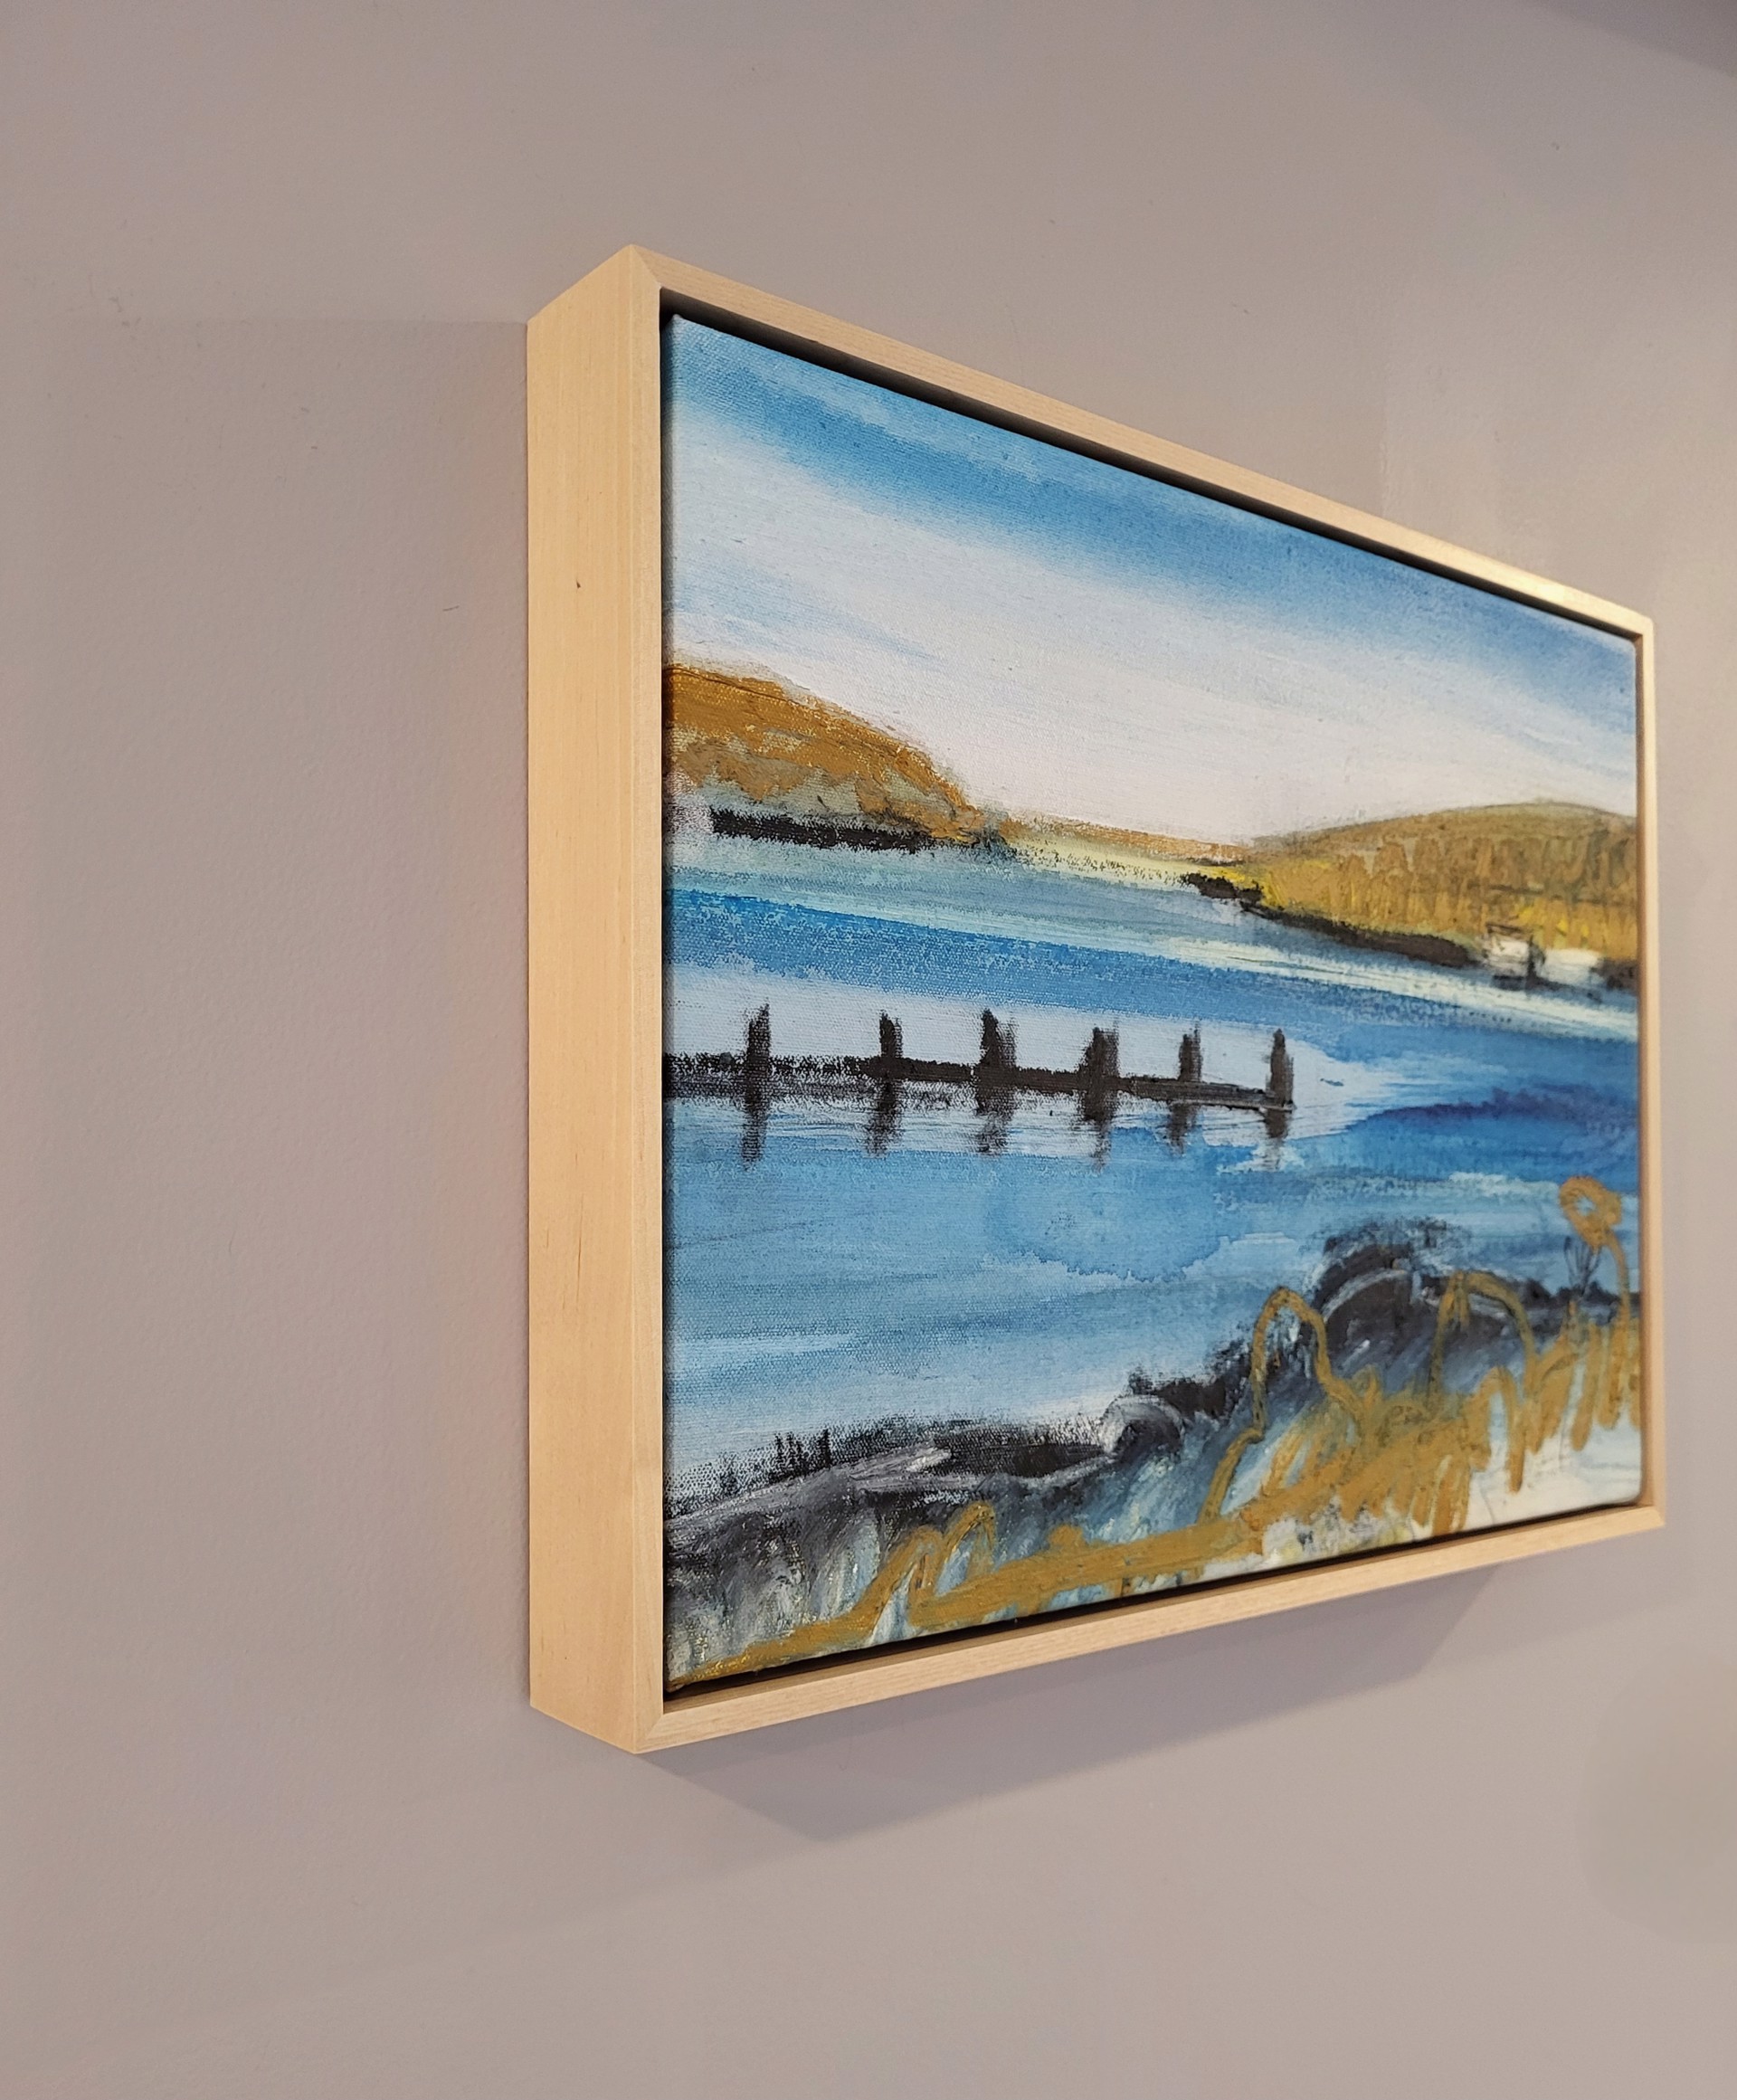 LOOKING DOWN THE COVE by CHRISTINA THWAITES (Landscape)